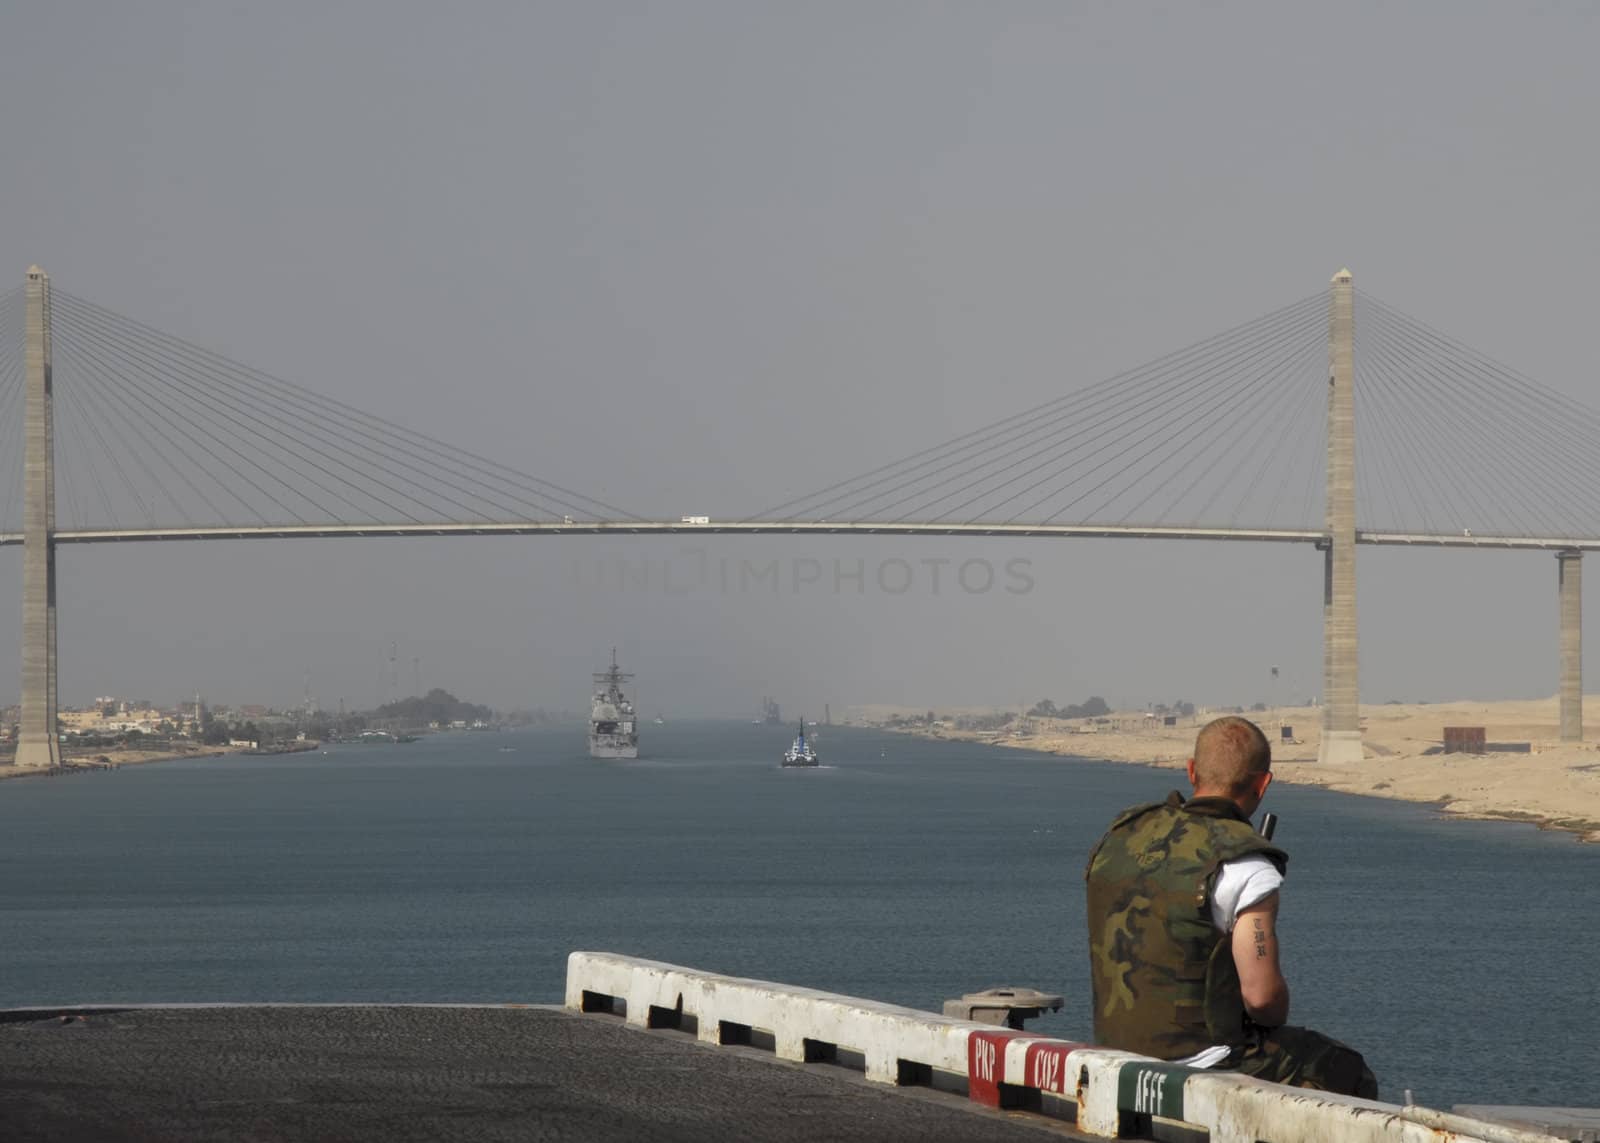 Soldier in Suez Canal by npologuy